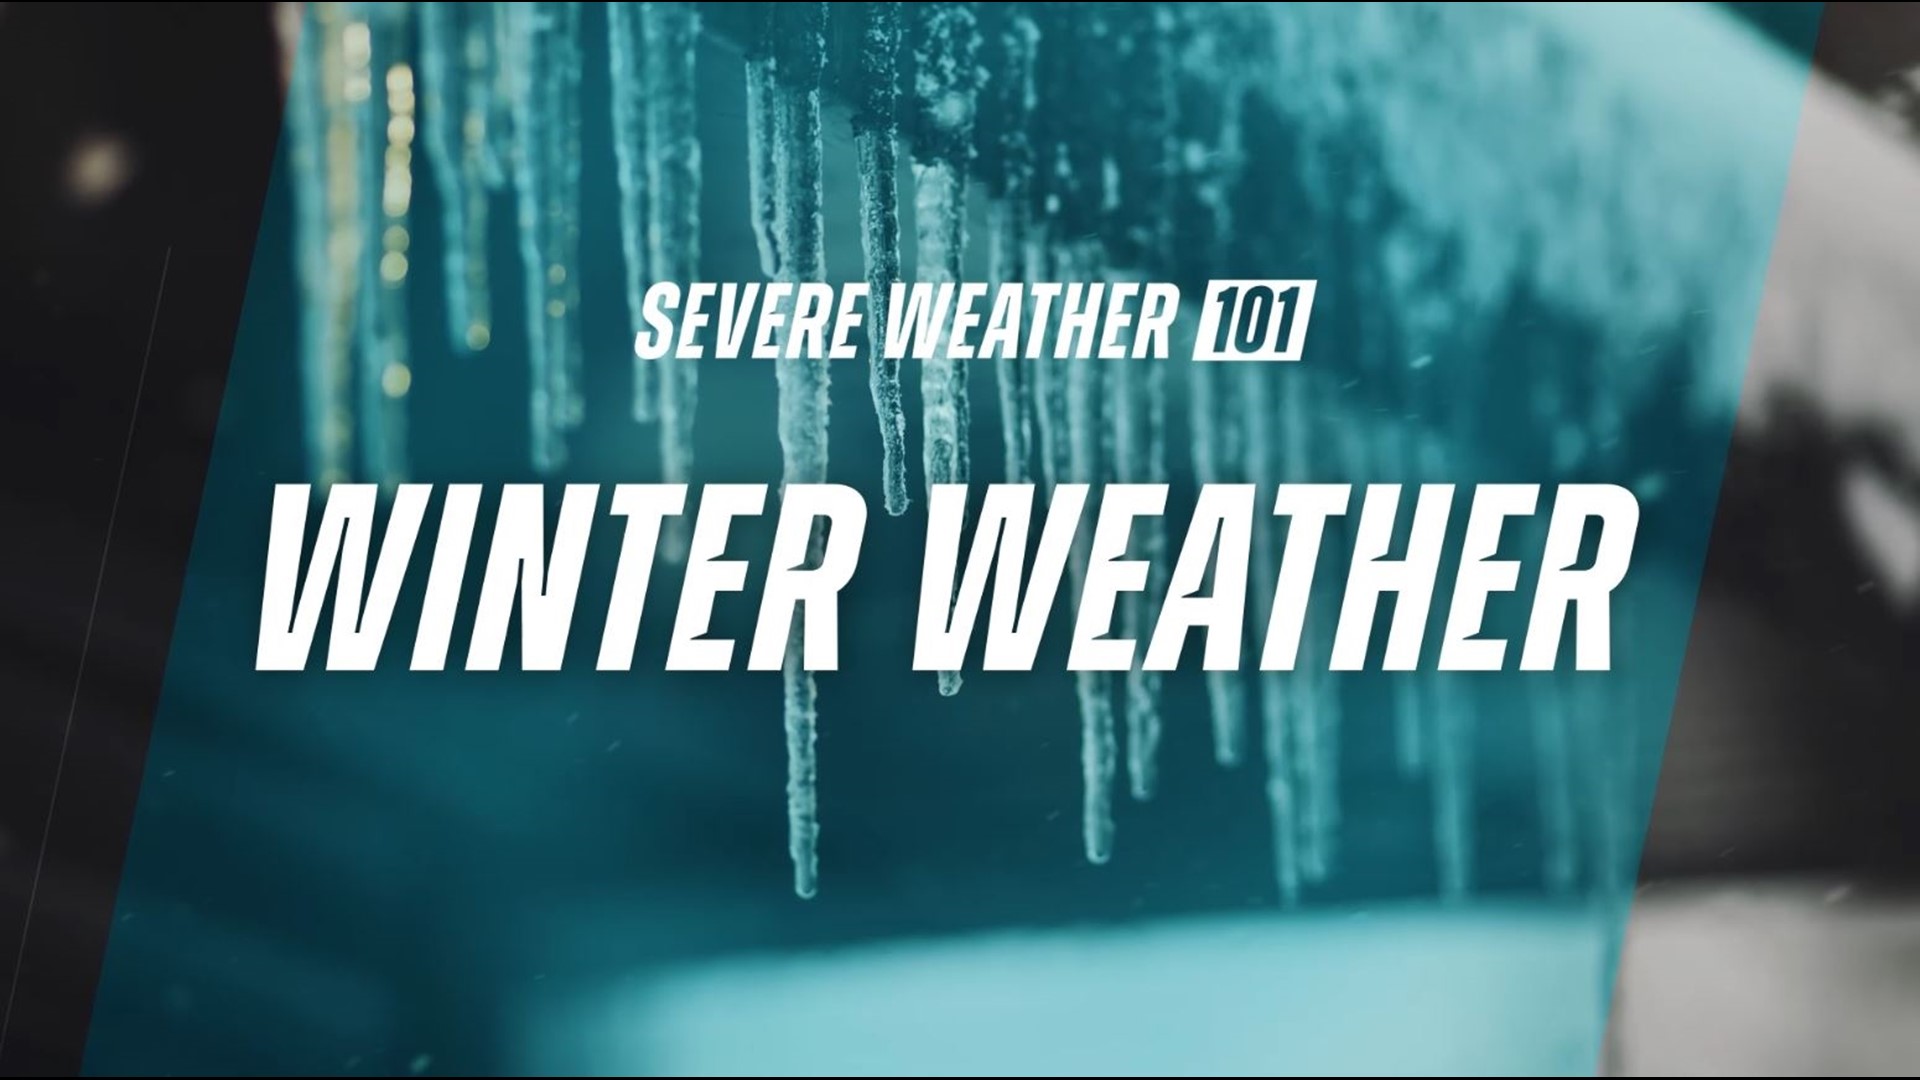 Winter weather brings heavy snows, frigid temperatures, high winds and more. A guide to winter weather terms and how to prepare you, your home and your car.